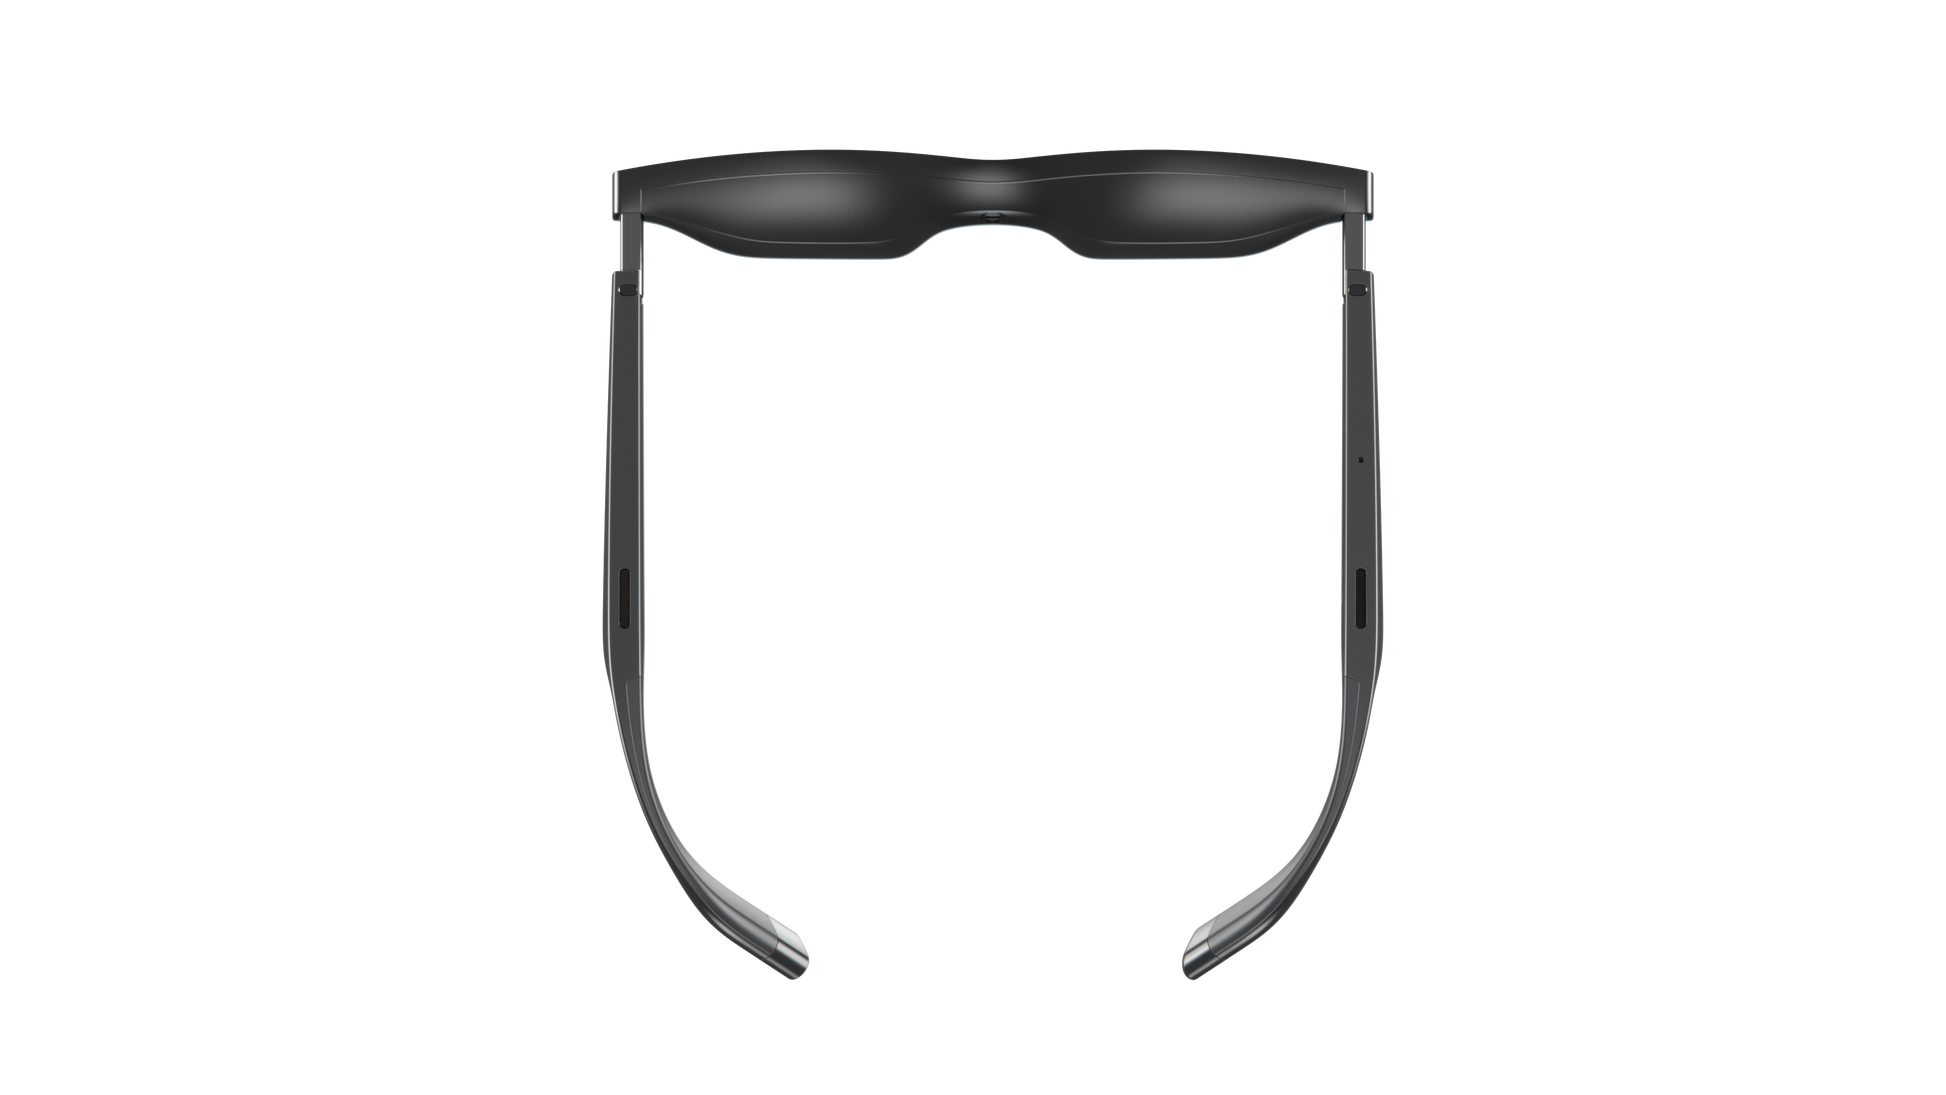 XREAL Air 2 Pro AR Glasses and Beam Bundle, The Ultimate Wearable Display  with 3-Level Immersion Control, Up to 330 IMAX Screen, Portable TV Box